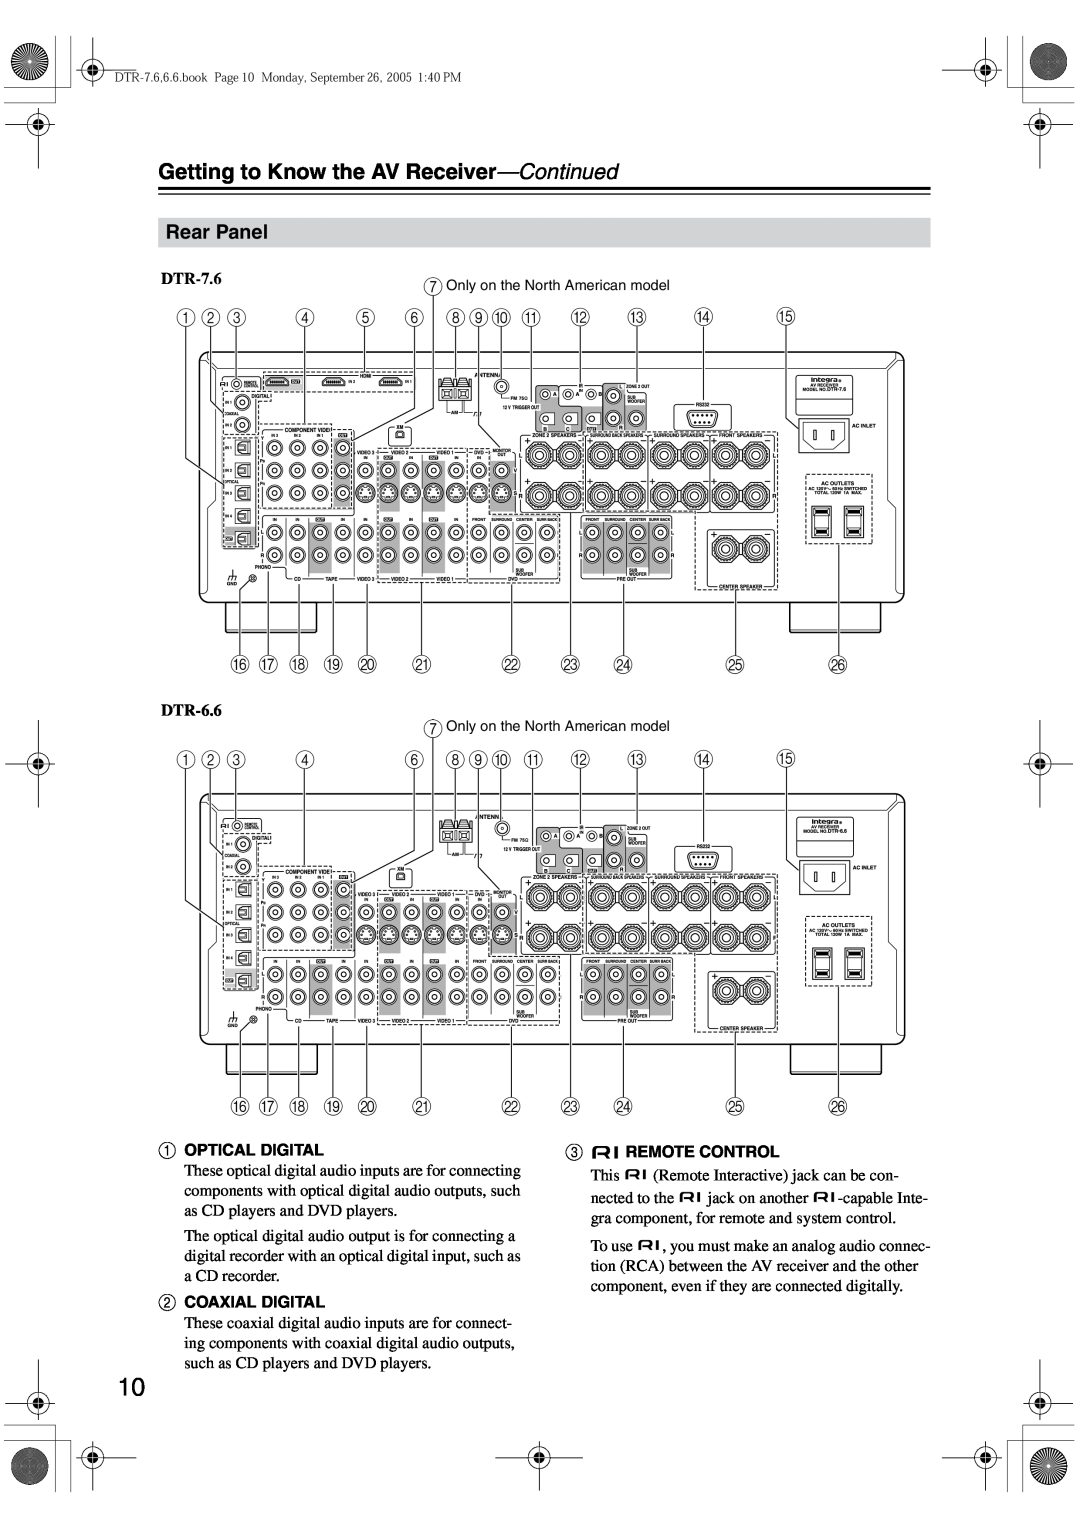 Integra DTR-7.6/6.6 instruction manual Rear Panel, Getting to Know the AV Receiver—Continued 